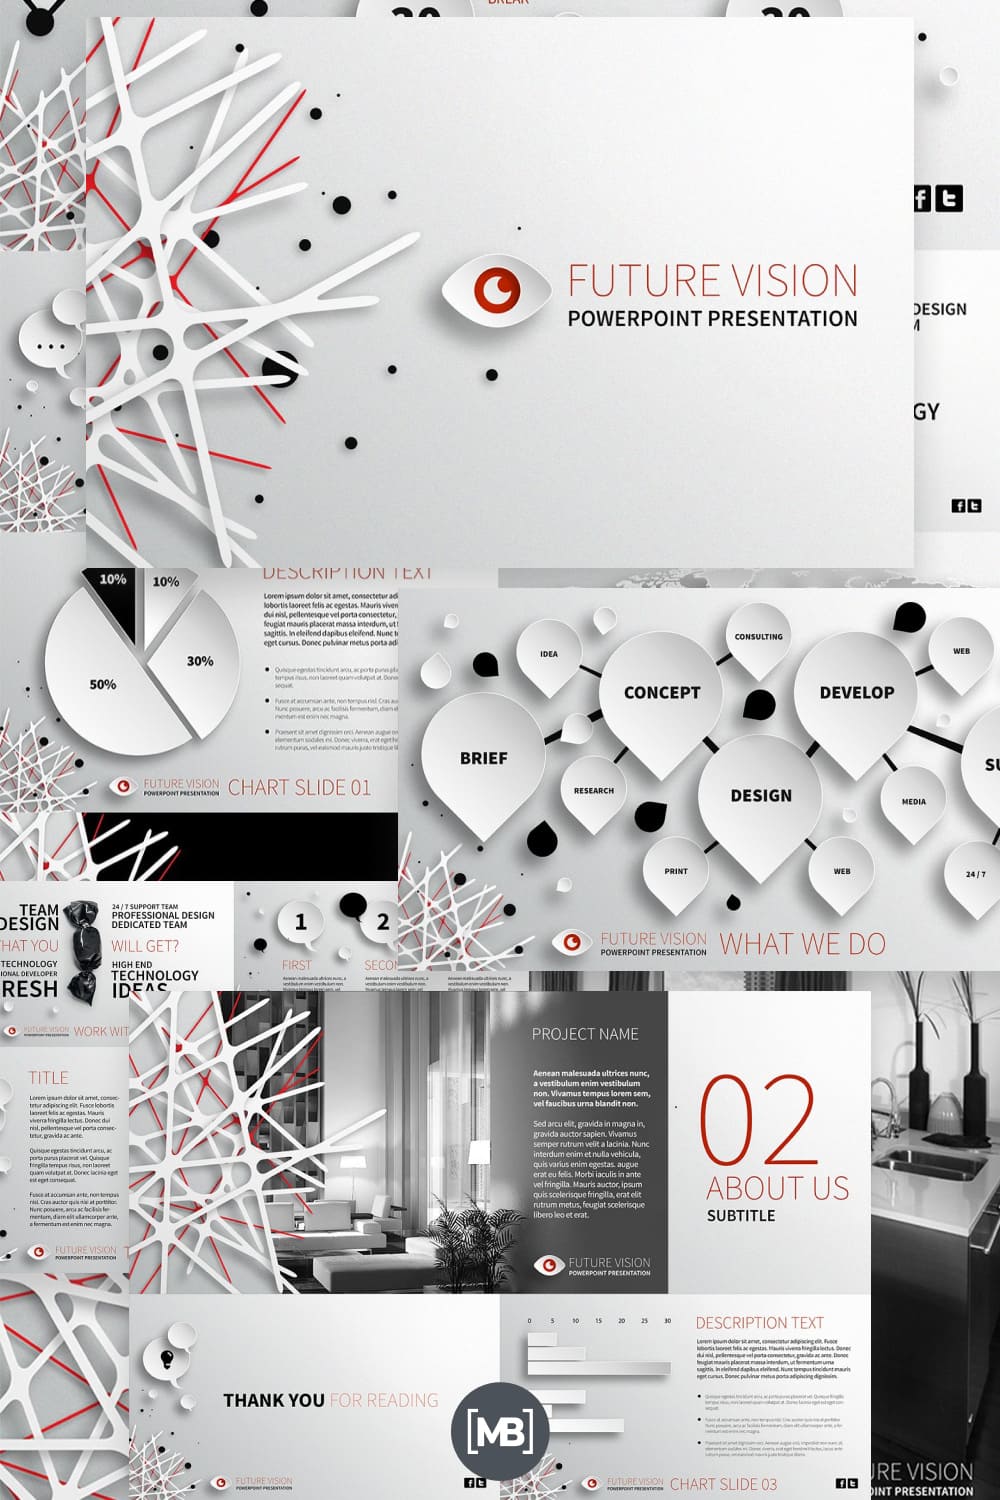 Future vision powerpoint template.